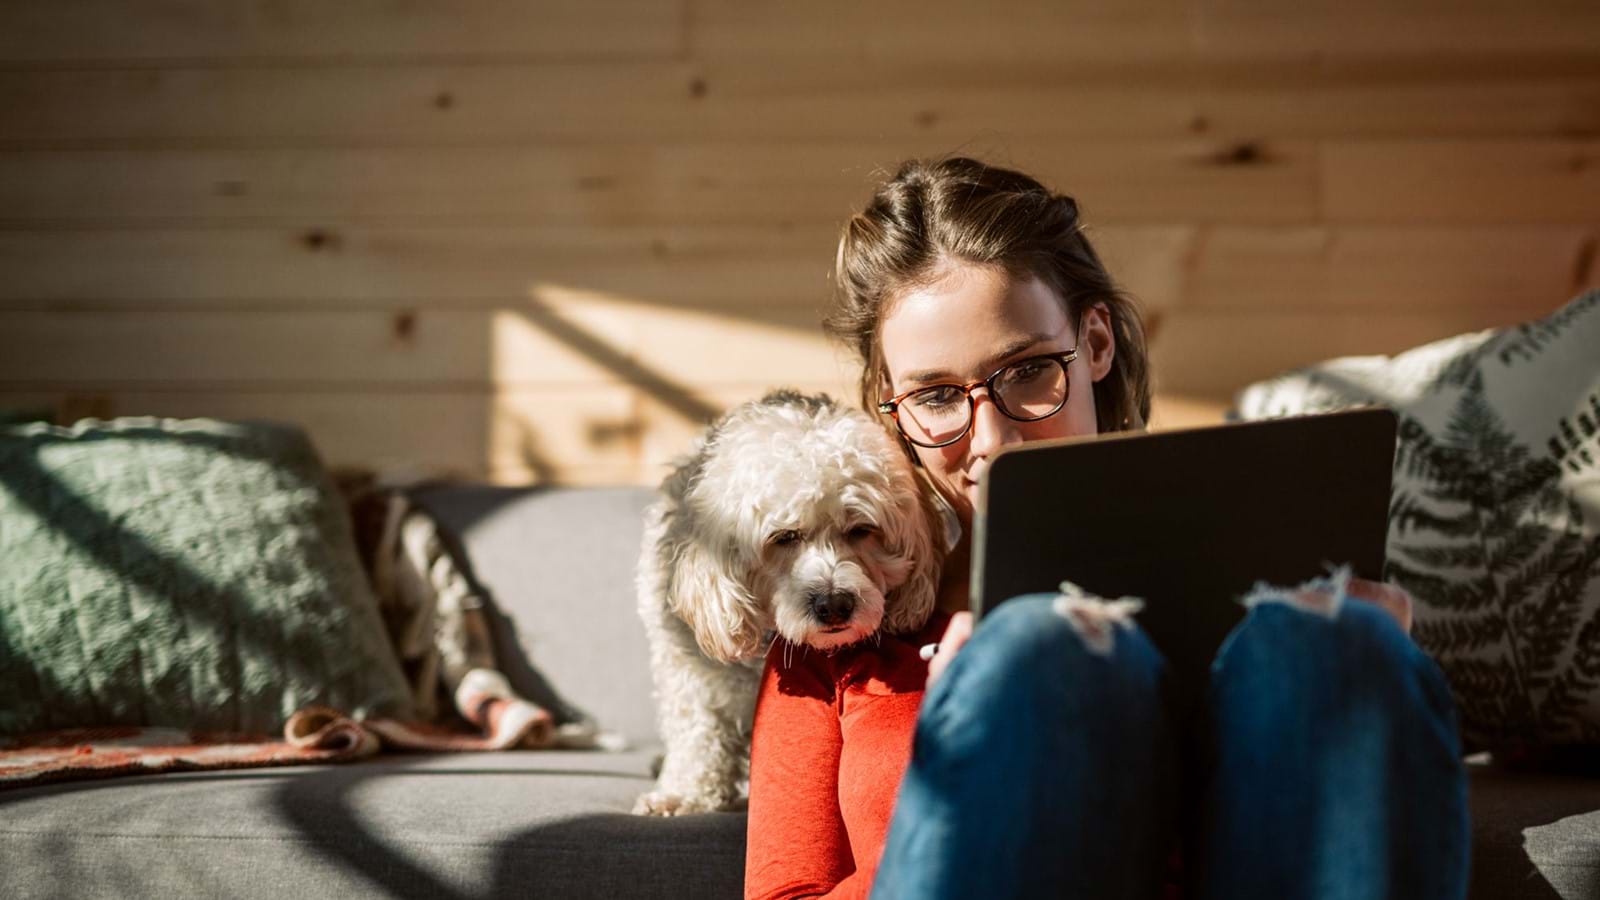 Remote worker looking at their digital workplace with dog